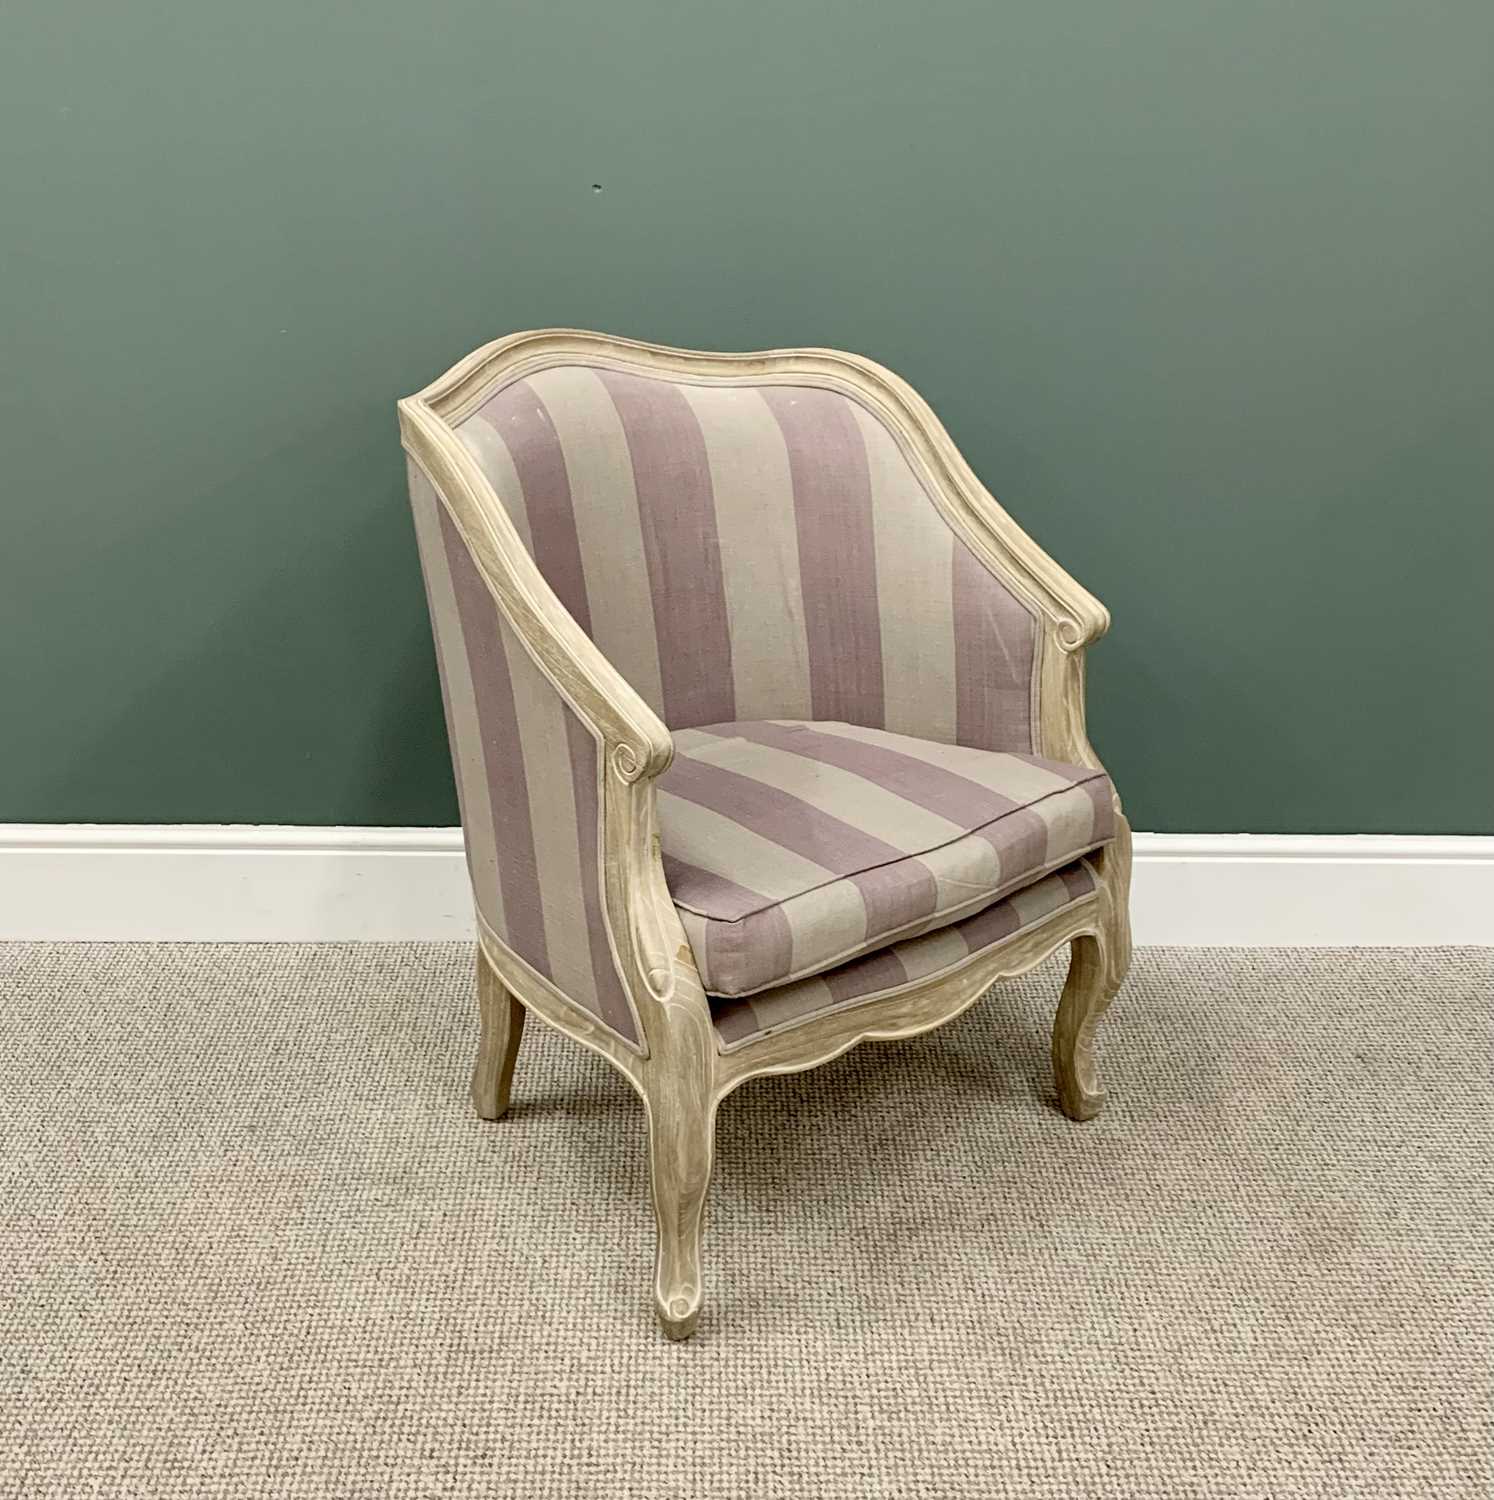 CLASSICALLY STYLED REPRODUCTION LIMED OAK EFFECT TUB CHAIR - having shaped carved detail and striped - Image 2 of 3